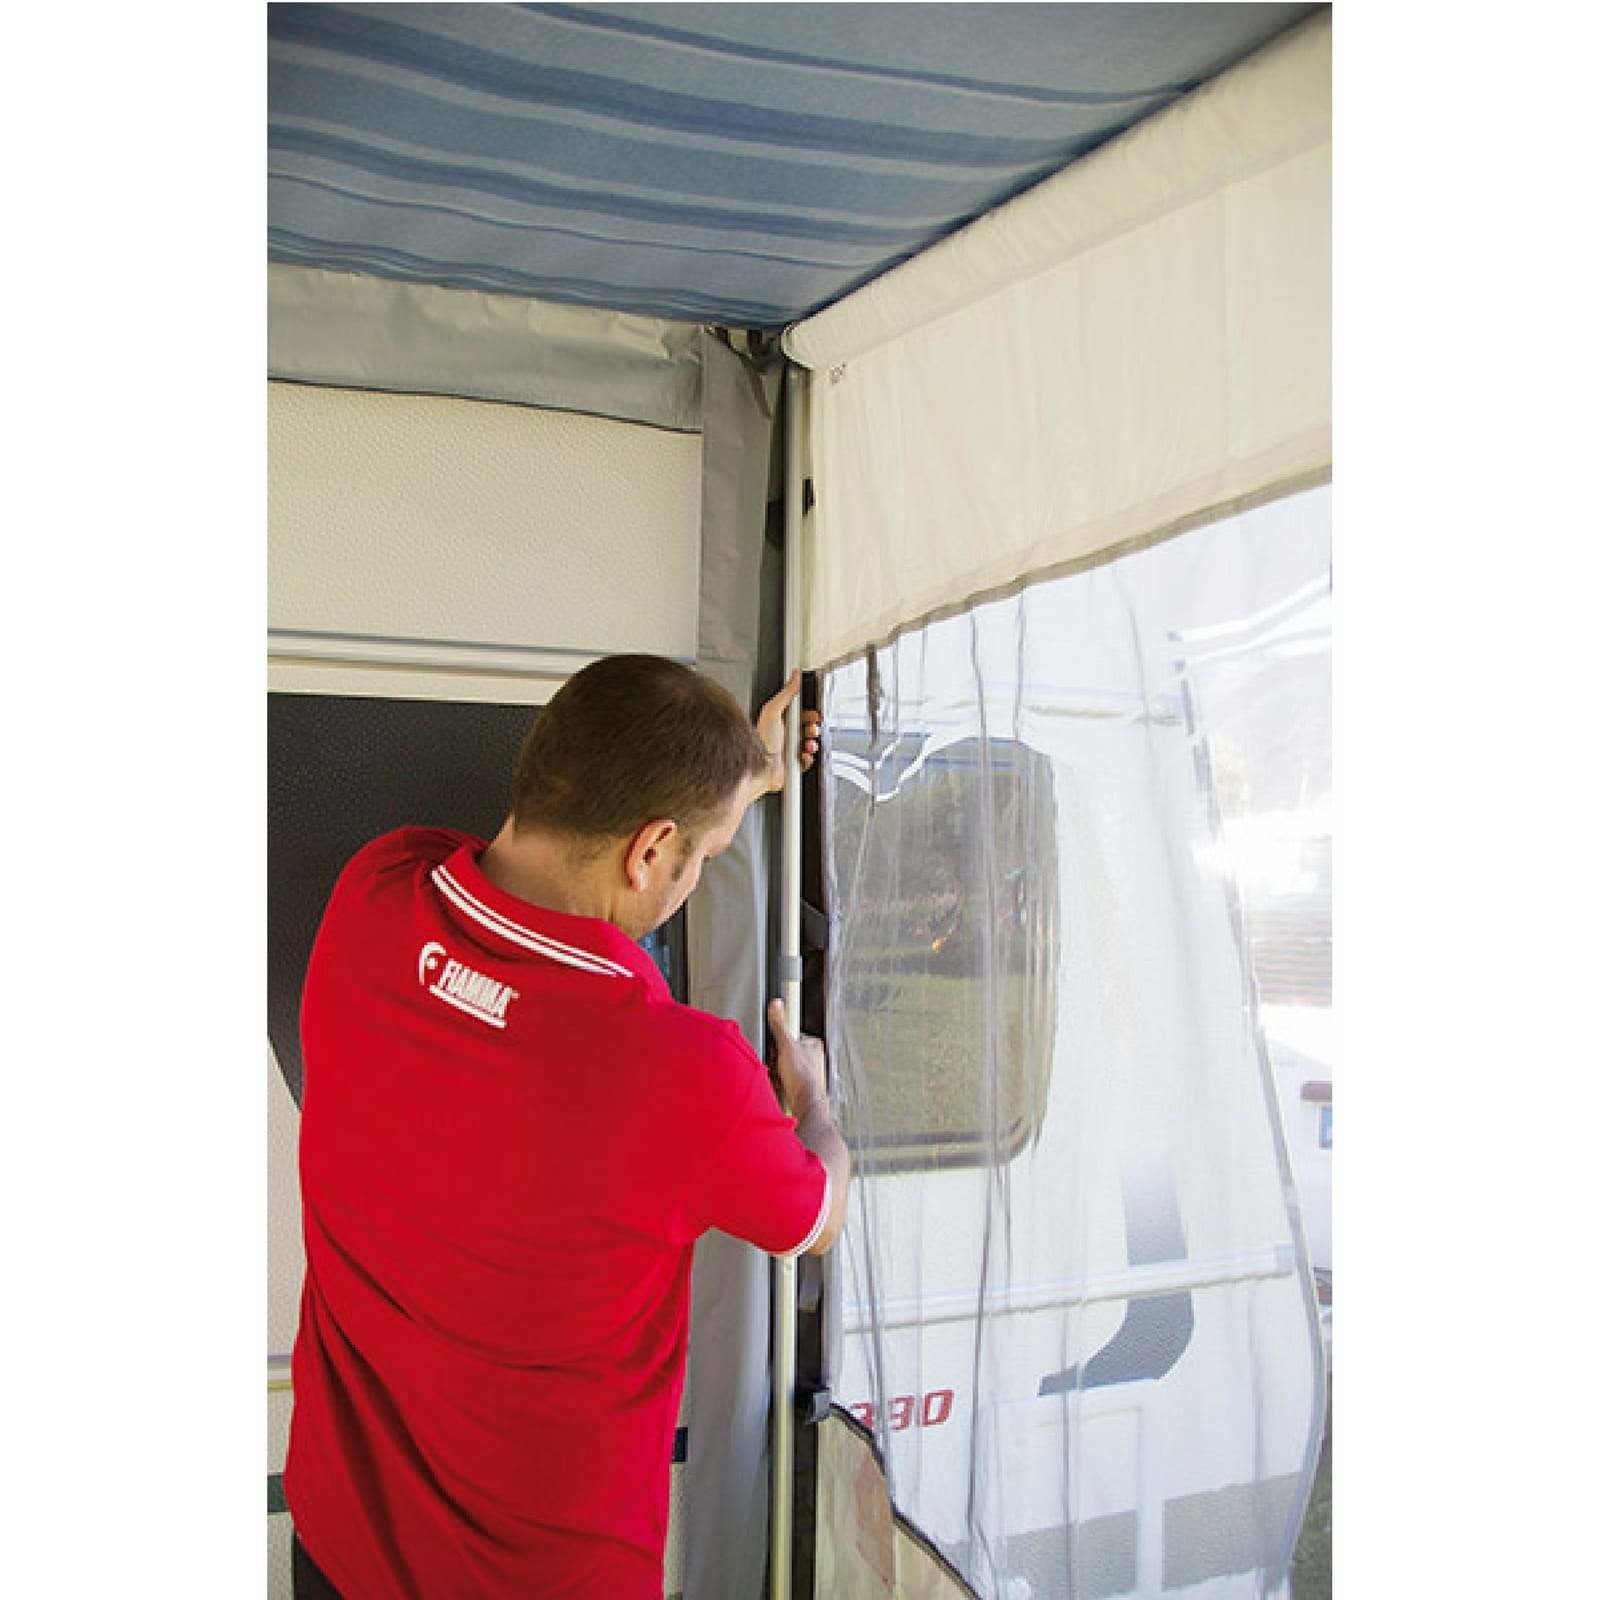 Fiamma Van Privacy Room Light made by Fiamma. A Tent sold by Quality Caravan Awnings